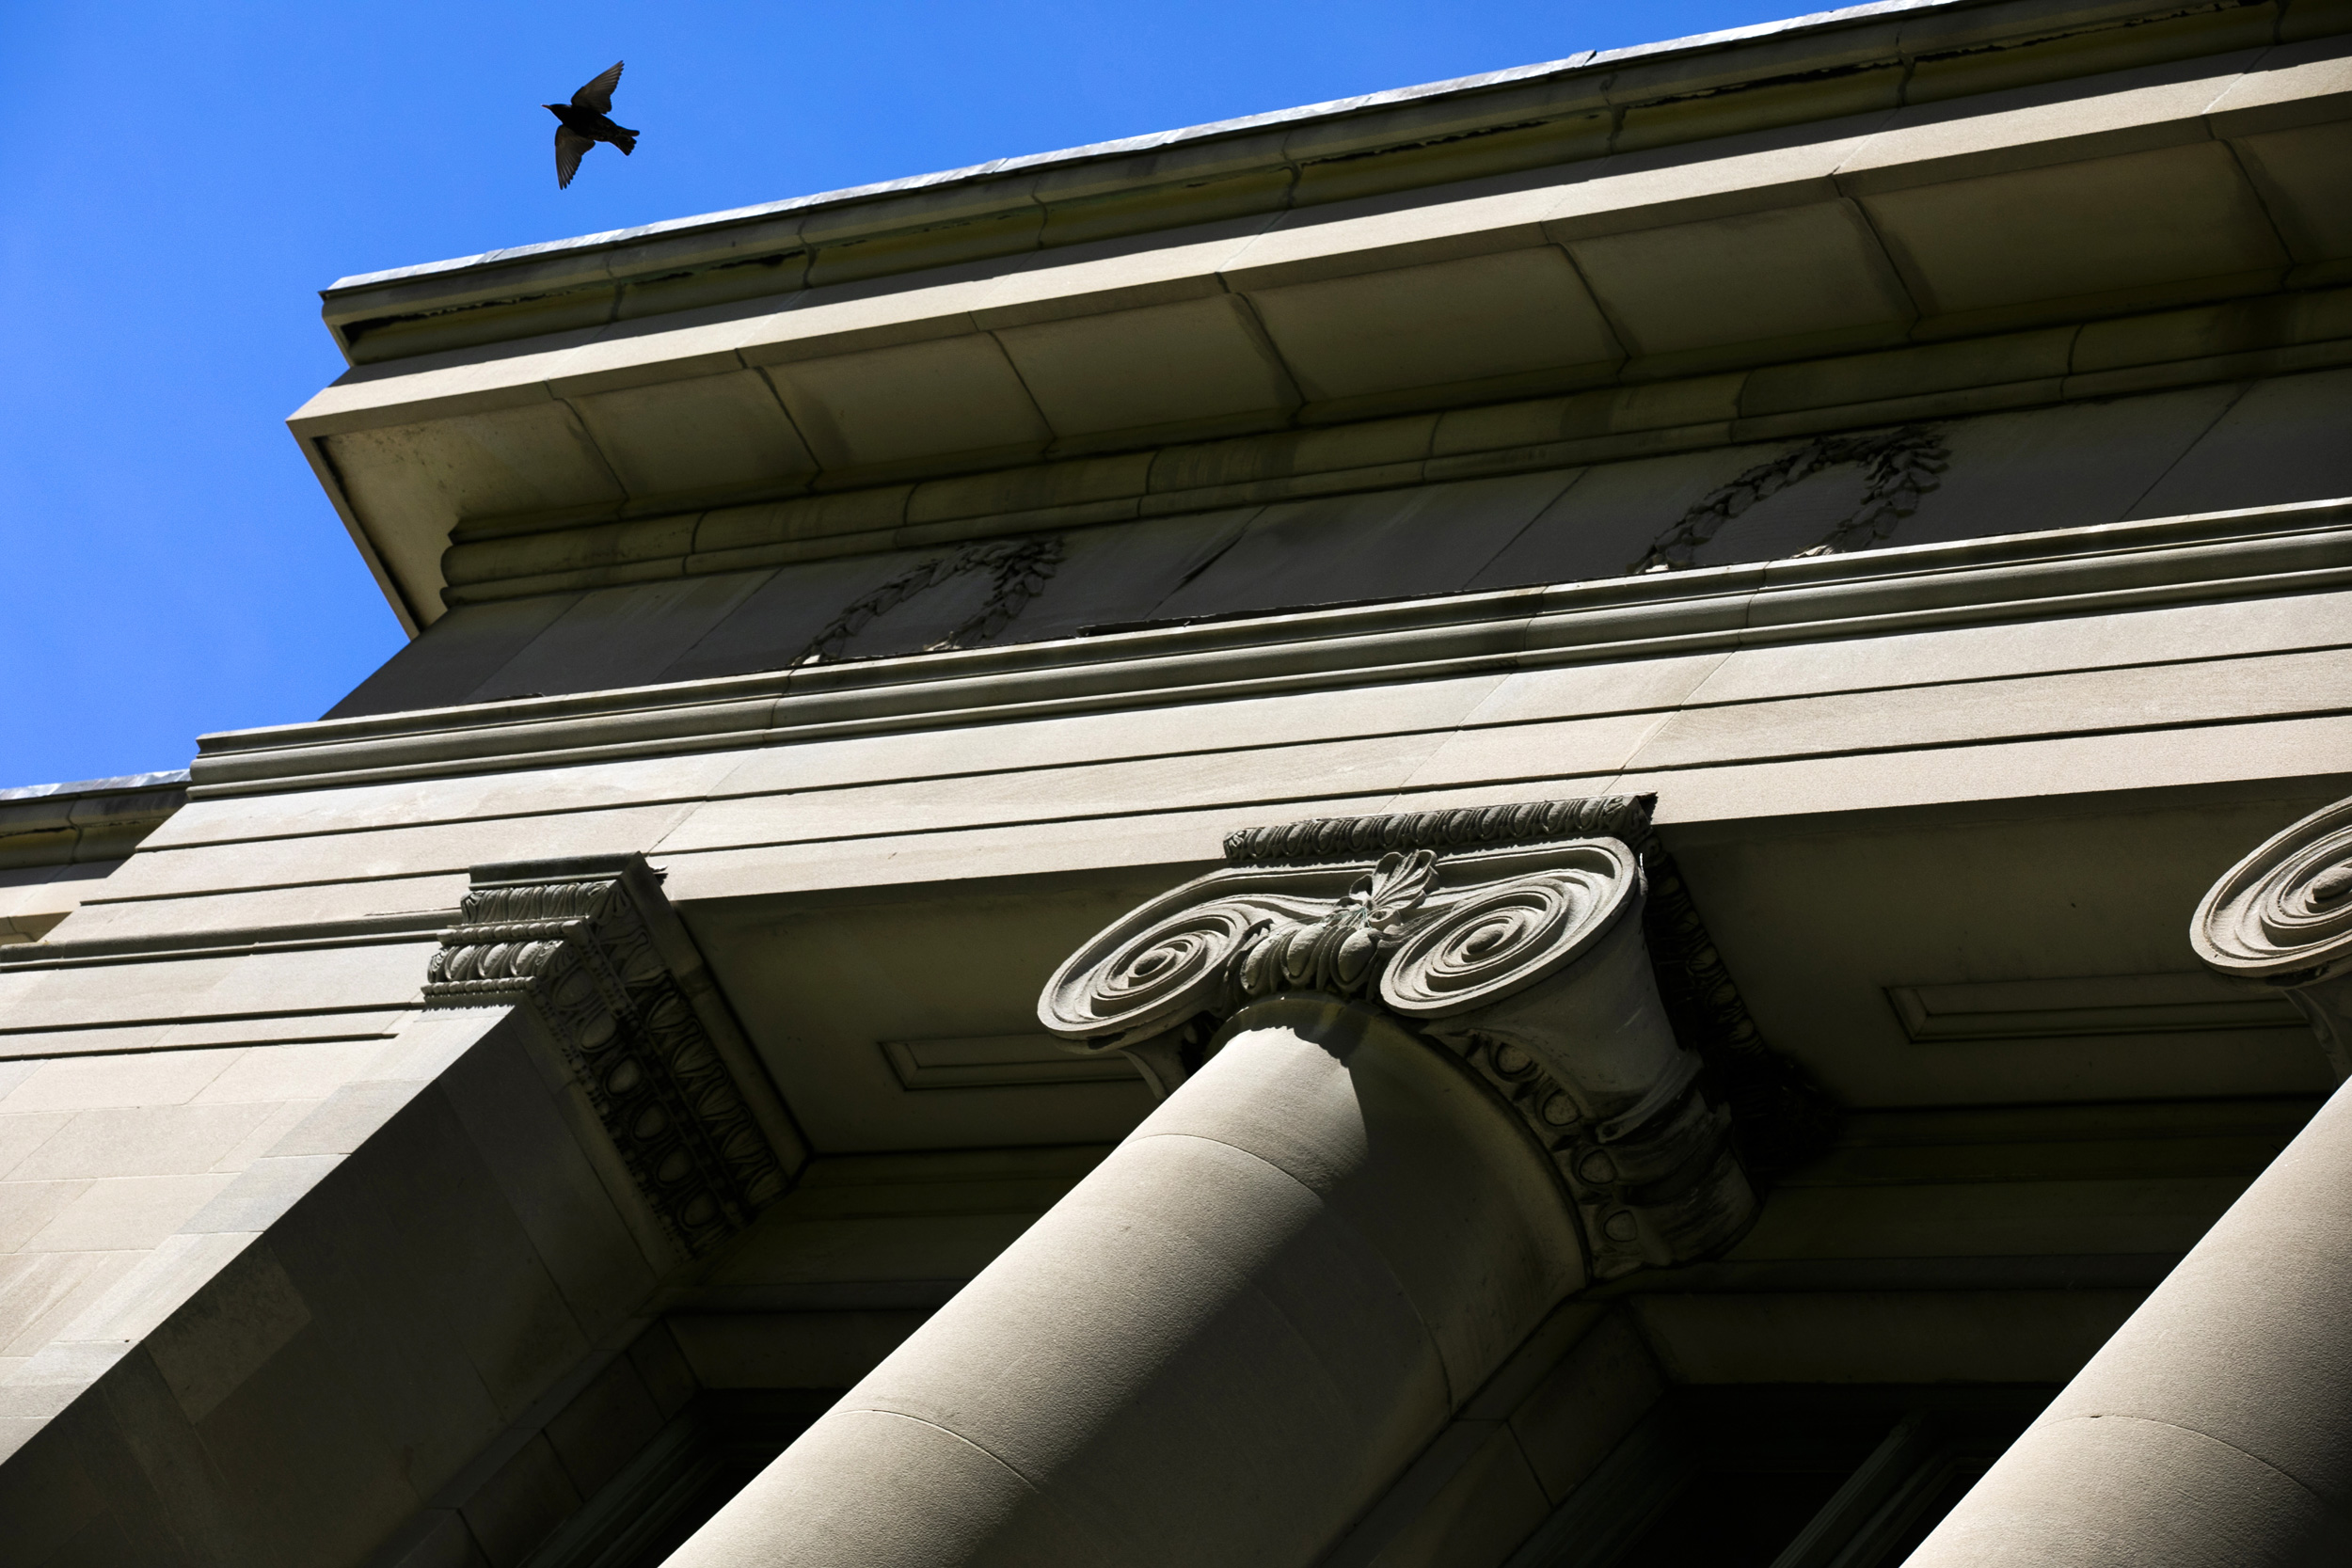 A bird takes flight over Langdell Hall at the Law School.